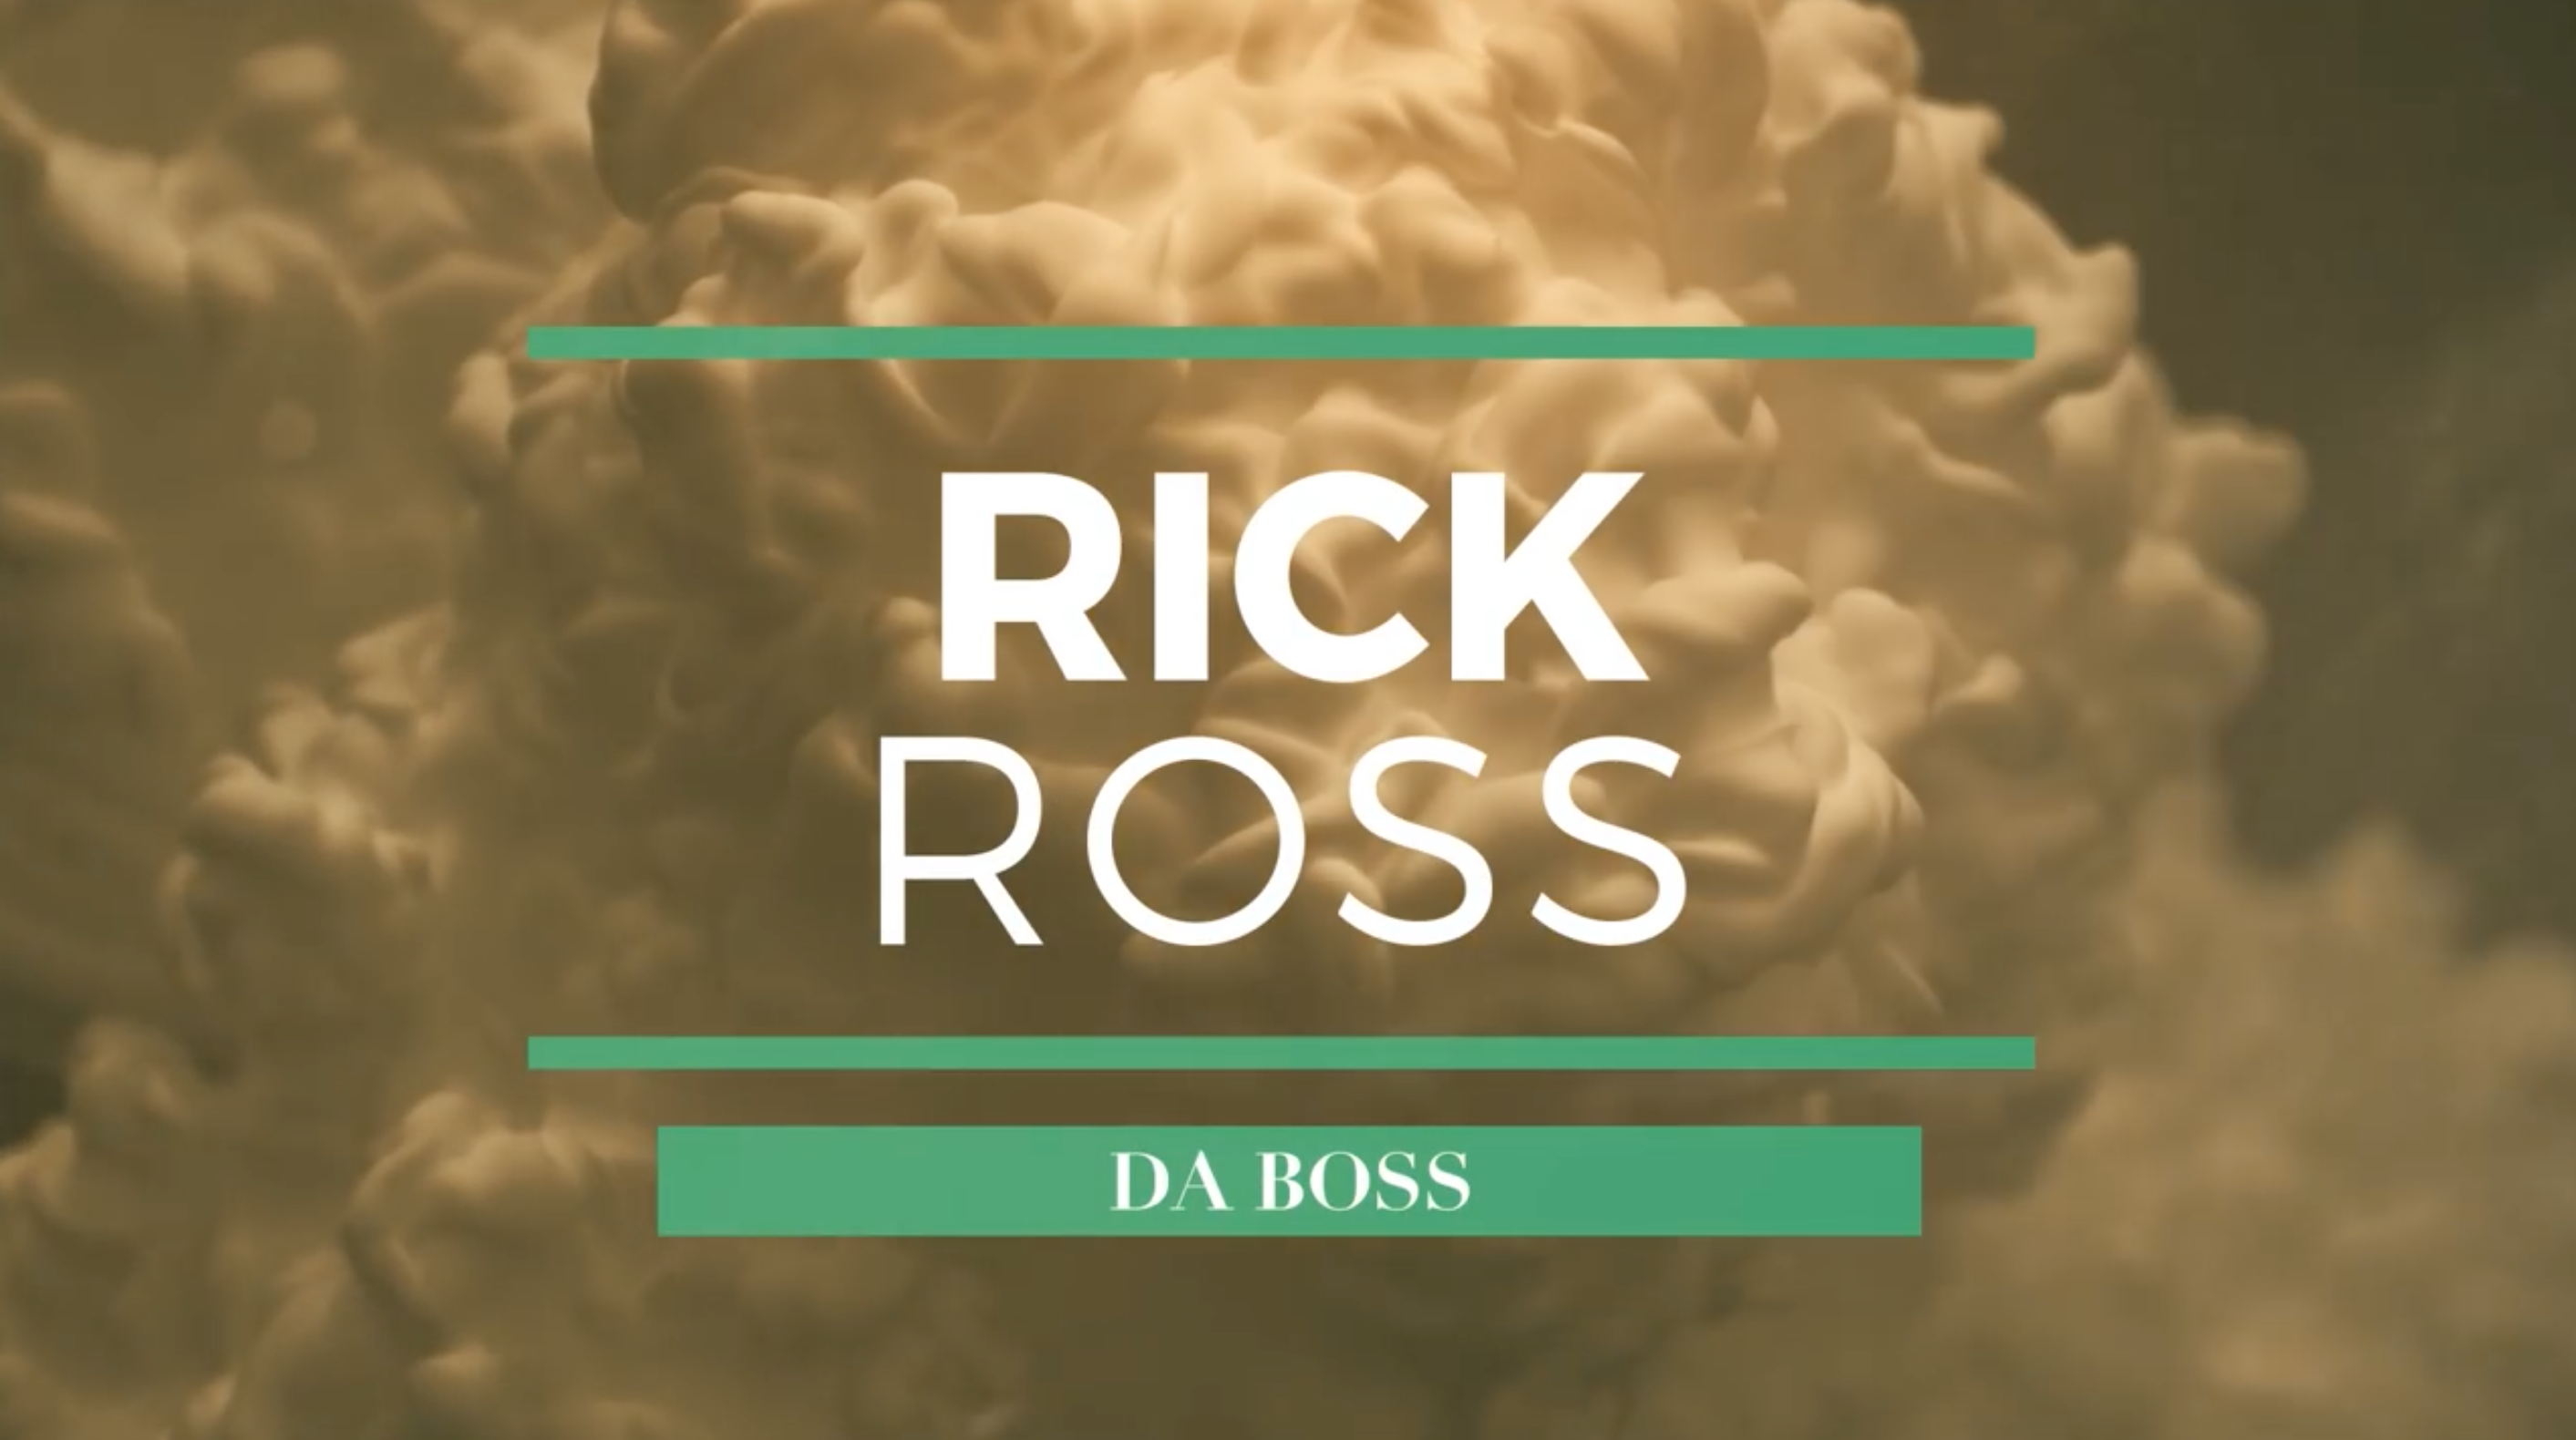 Deflowered with Rick Ross